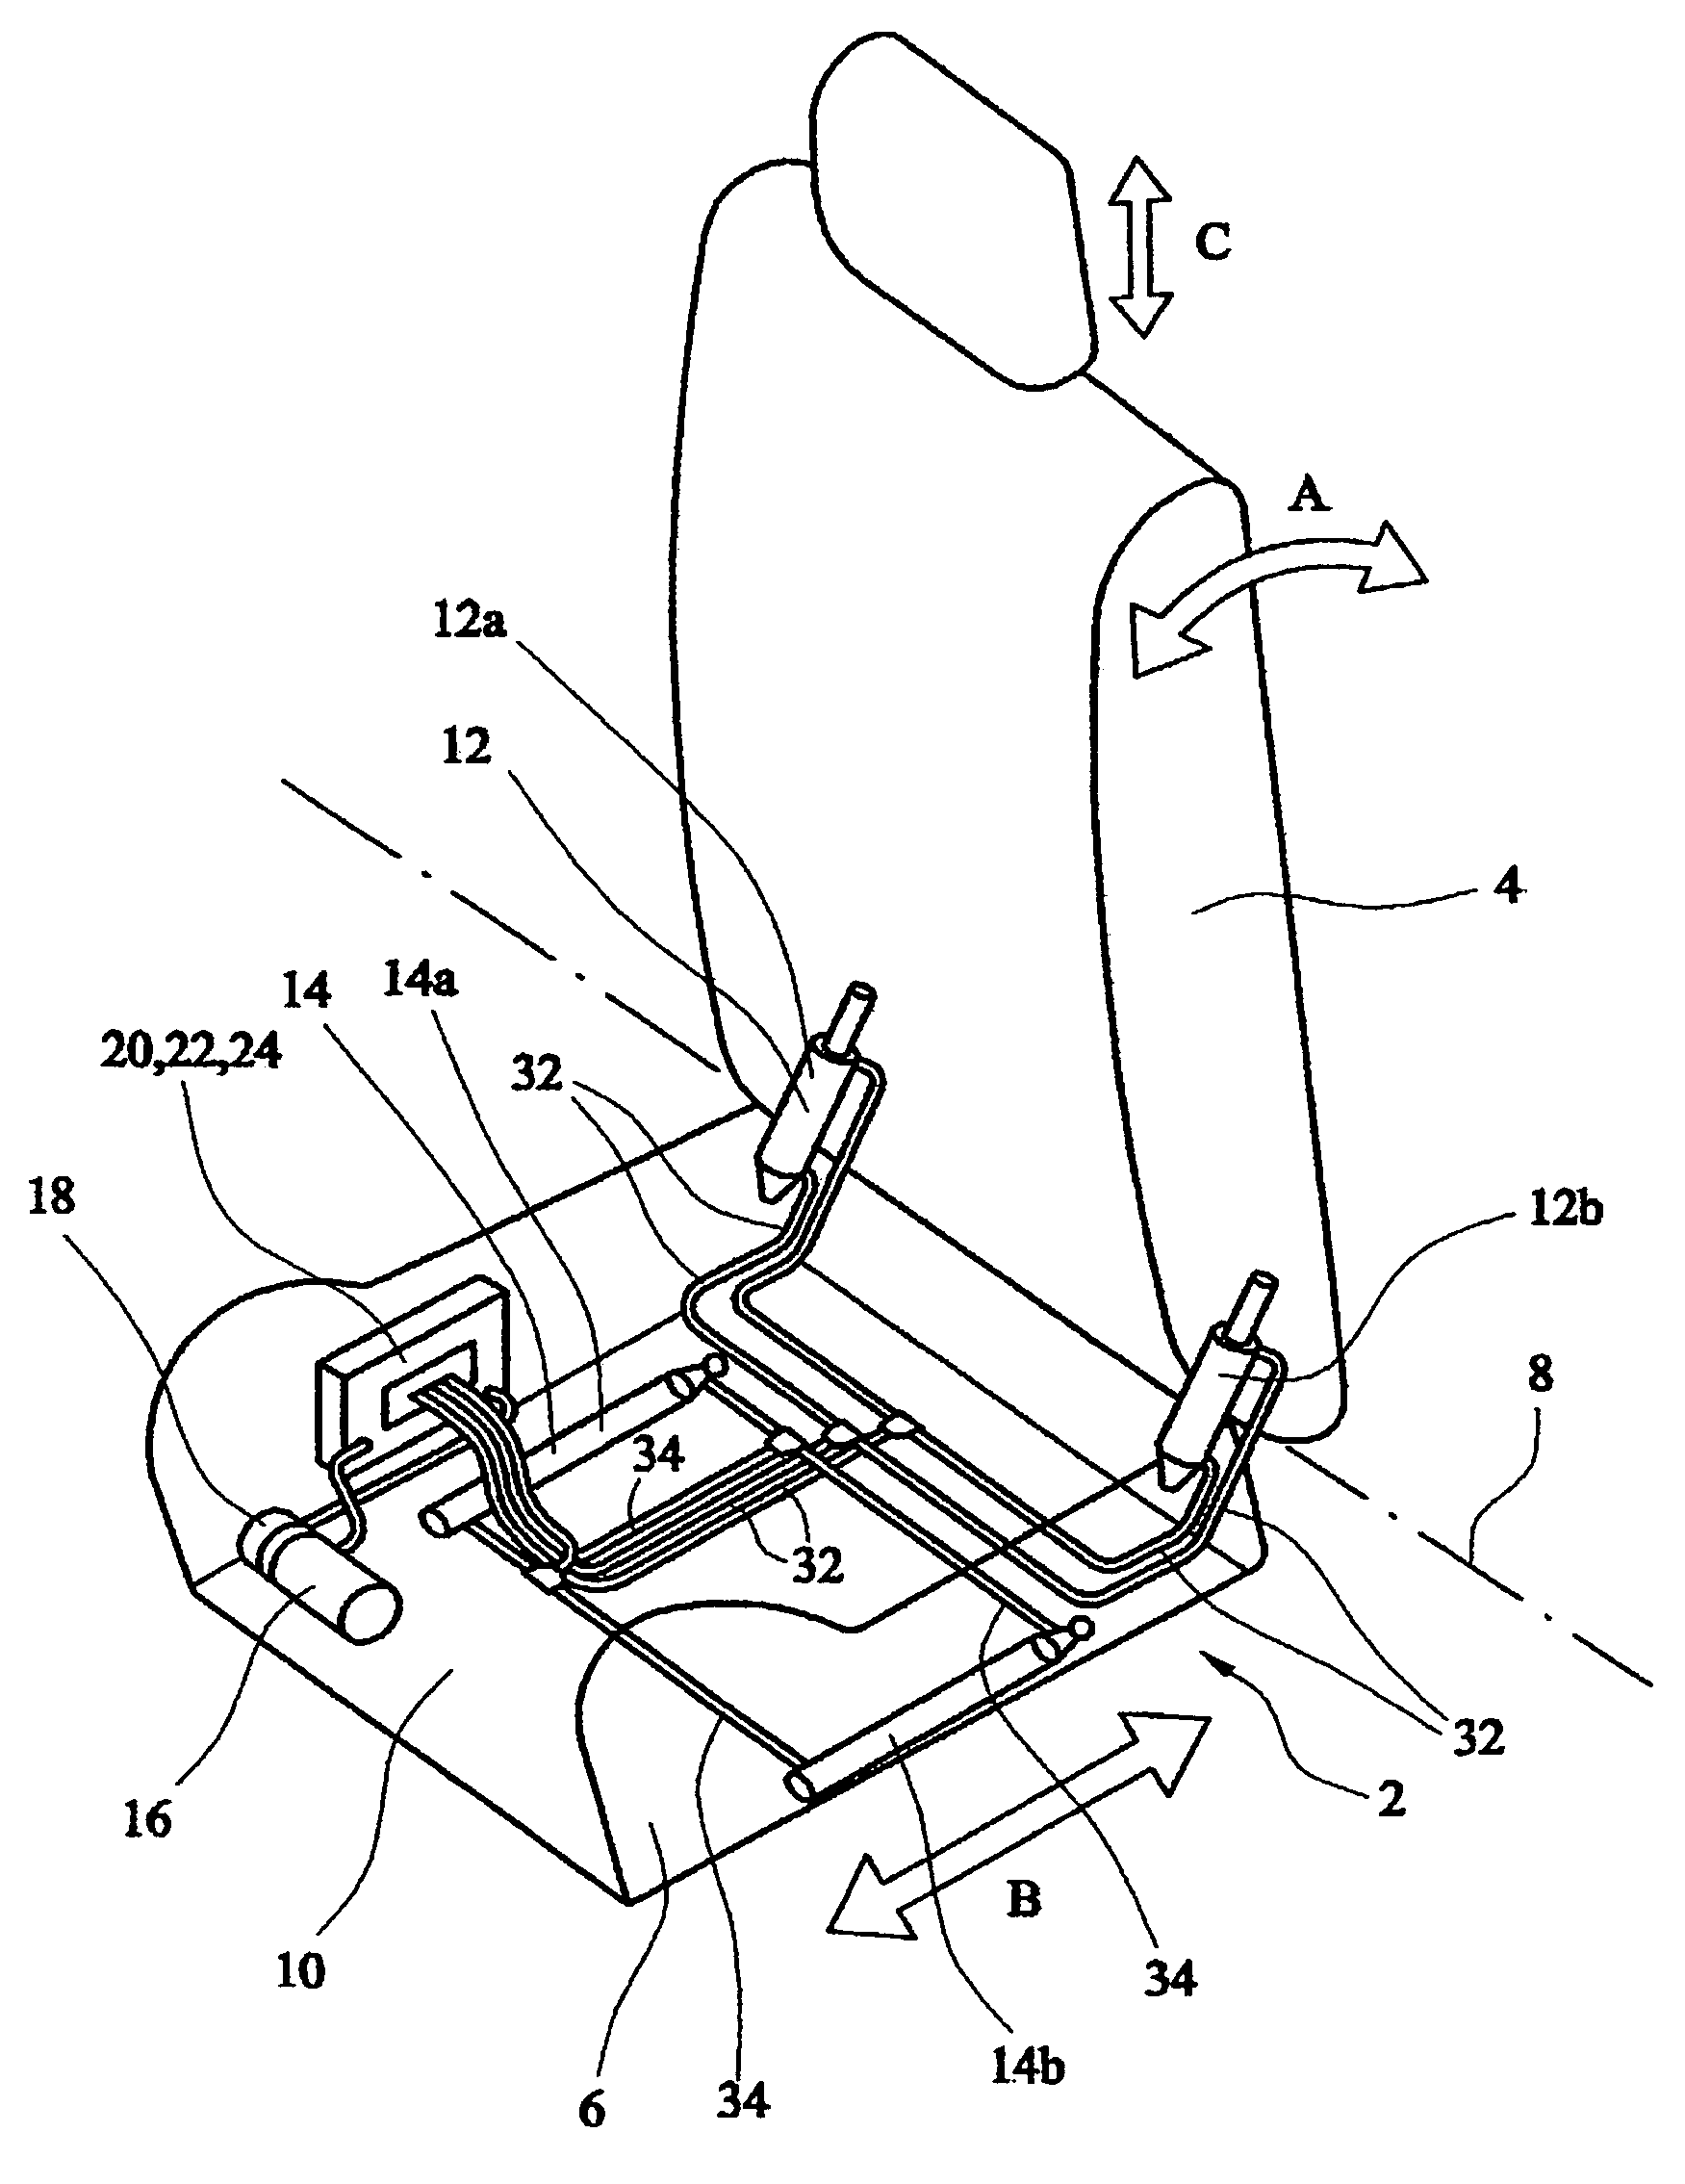 Hydraulic vehicle seat adjustment with system protection valve